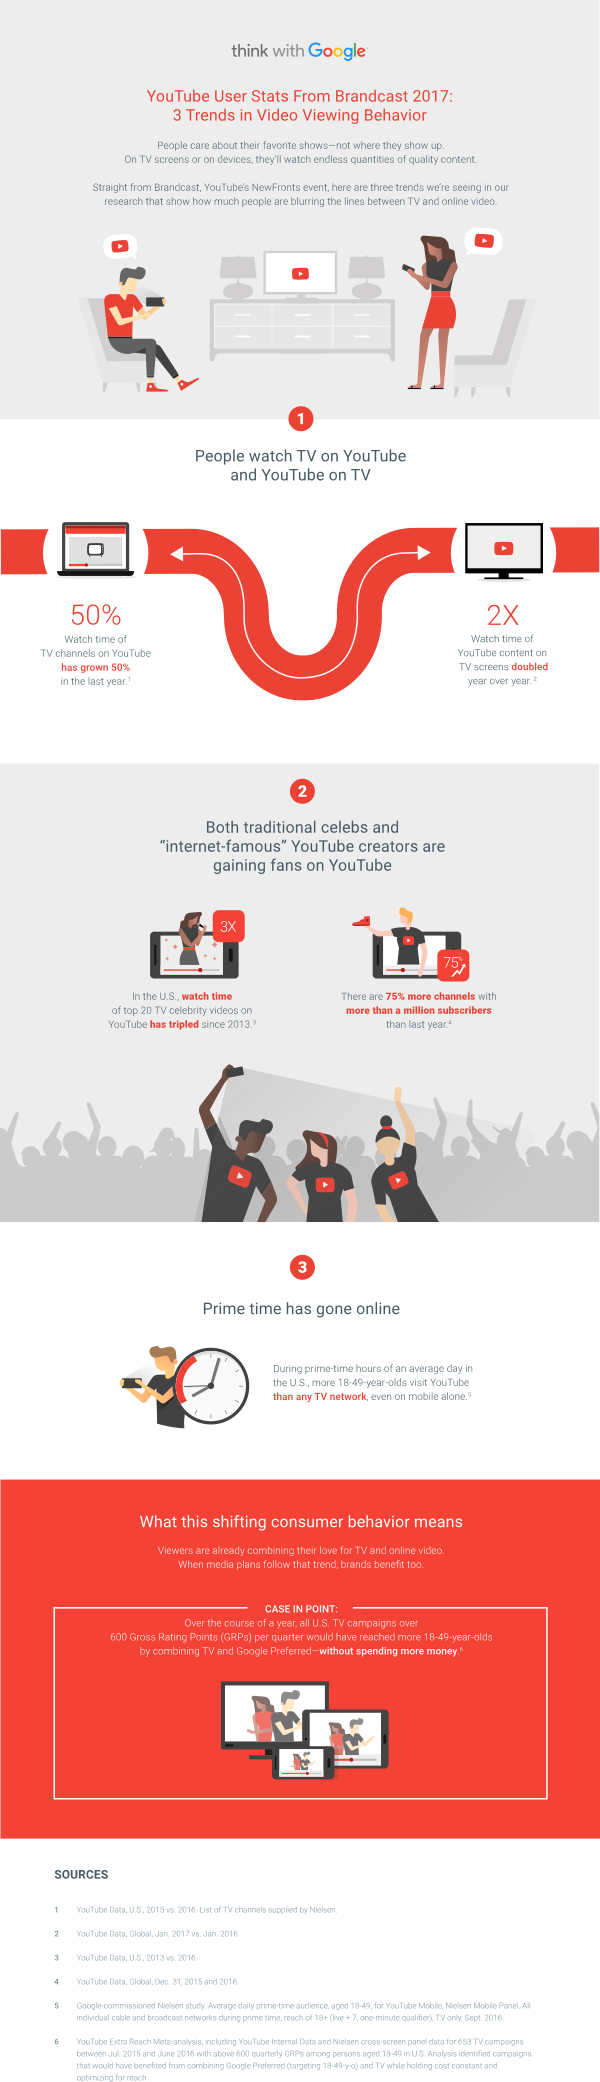 YouTube user stats from Brandcast 2017: 3 trends in video viewing behavior - #infographic